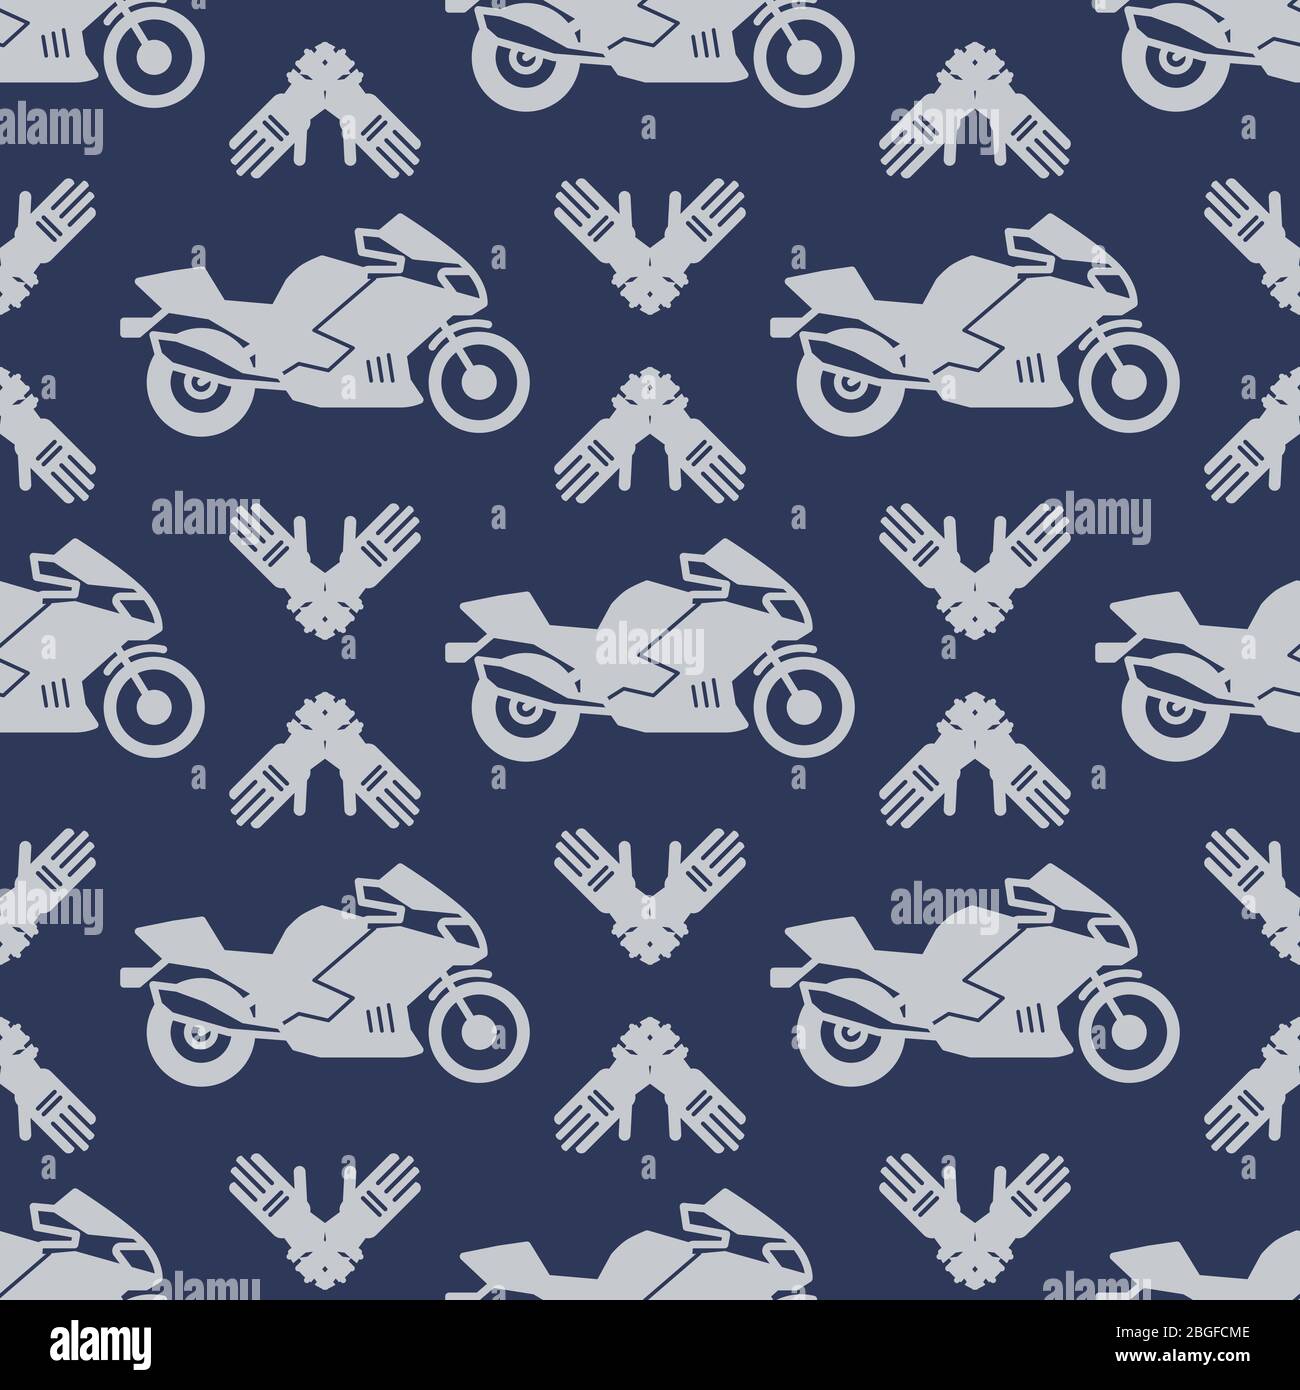 Motosport seamless pattern background with motocycle and accessories. Vector illustration Stock Vector